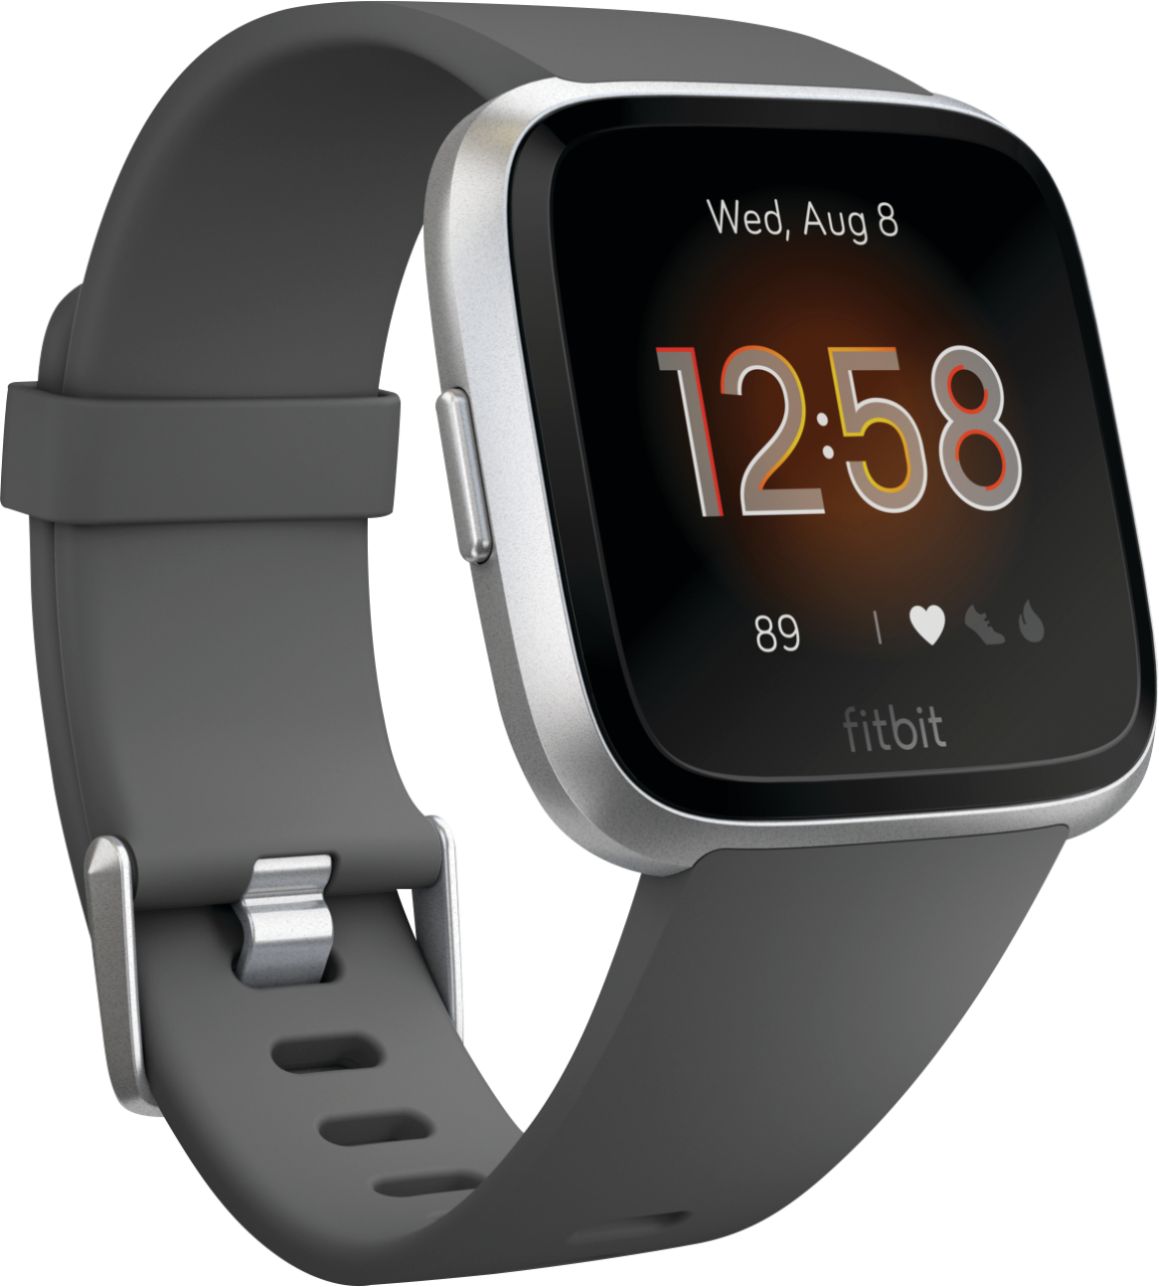 Angle View: Fitbit - Versa Lite Edition Smartwatch - Silver with Charcoal Silicone Band